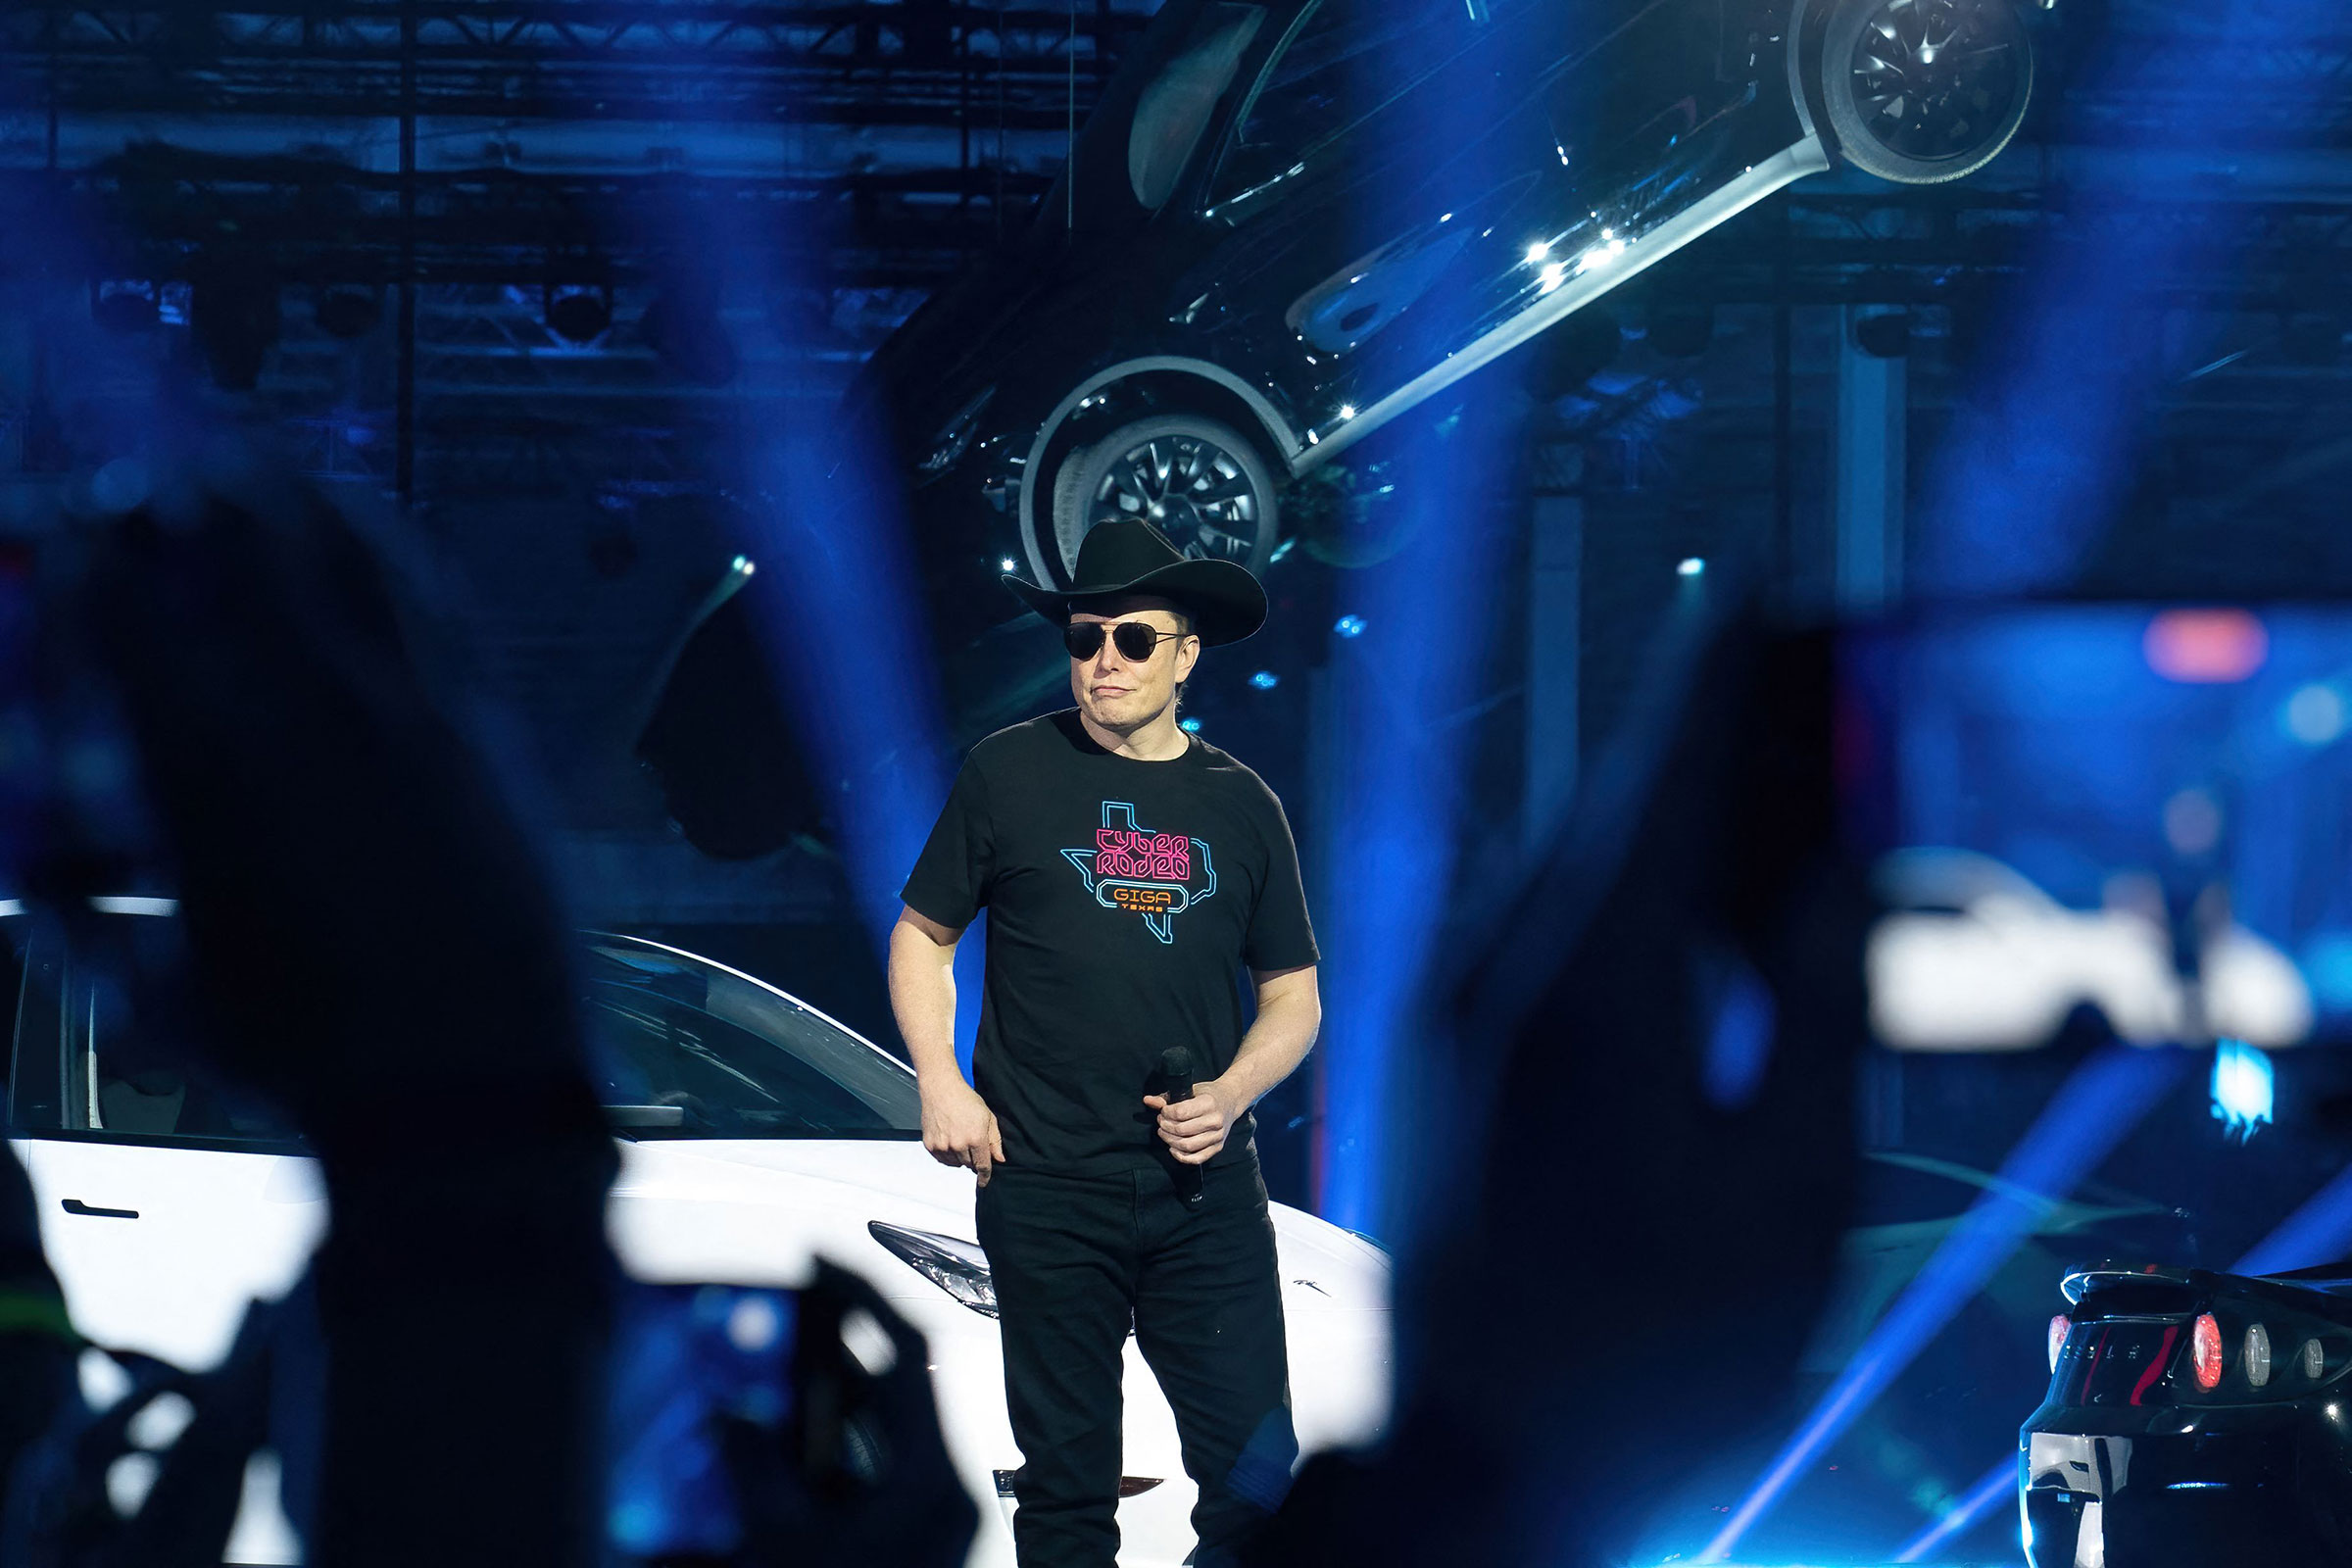 Elon Musk speaks at the Tesla Giga Texas manufacturing "Cyber Rodeo" grand opening party in Austin on April 7, 2022. (Suzanne Cordeiro—AFP/Getty Images)